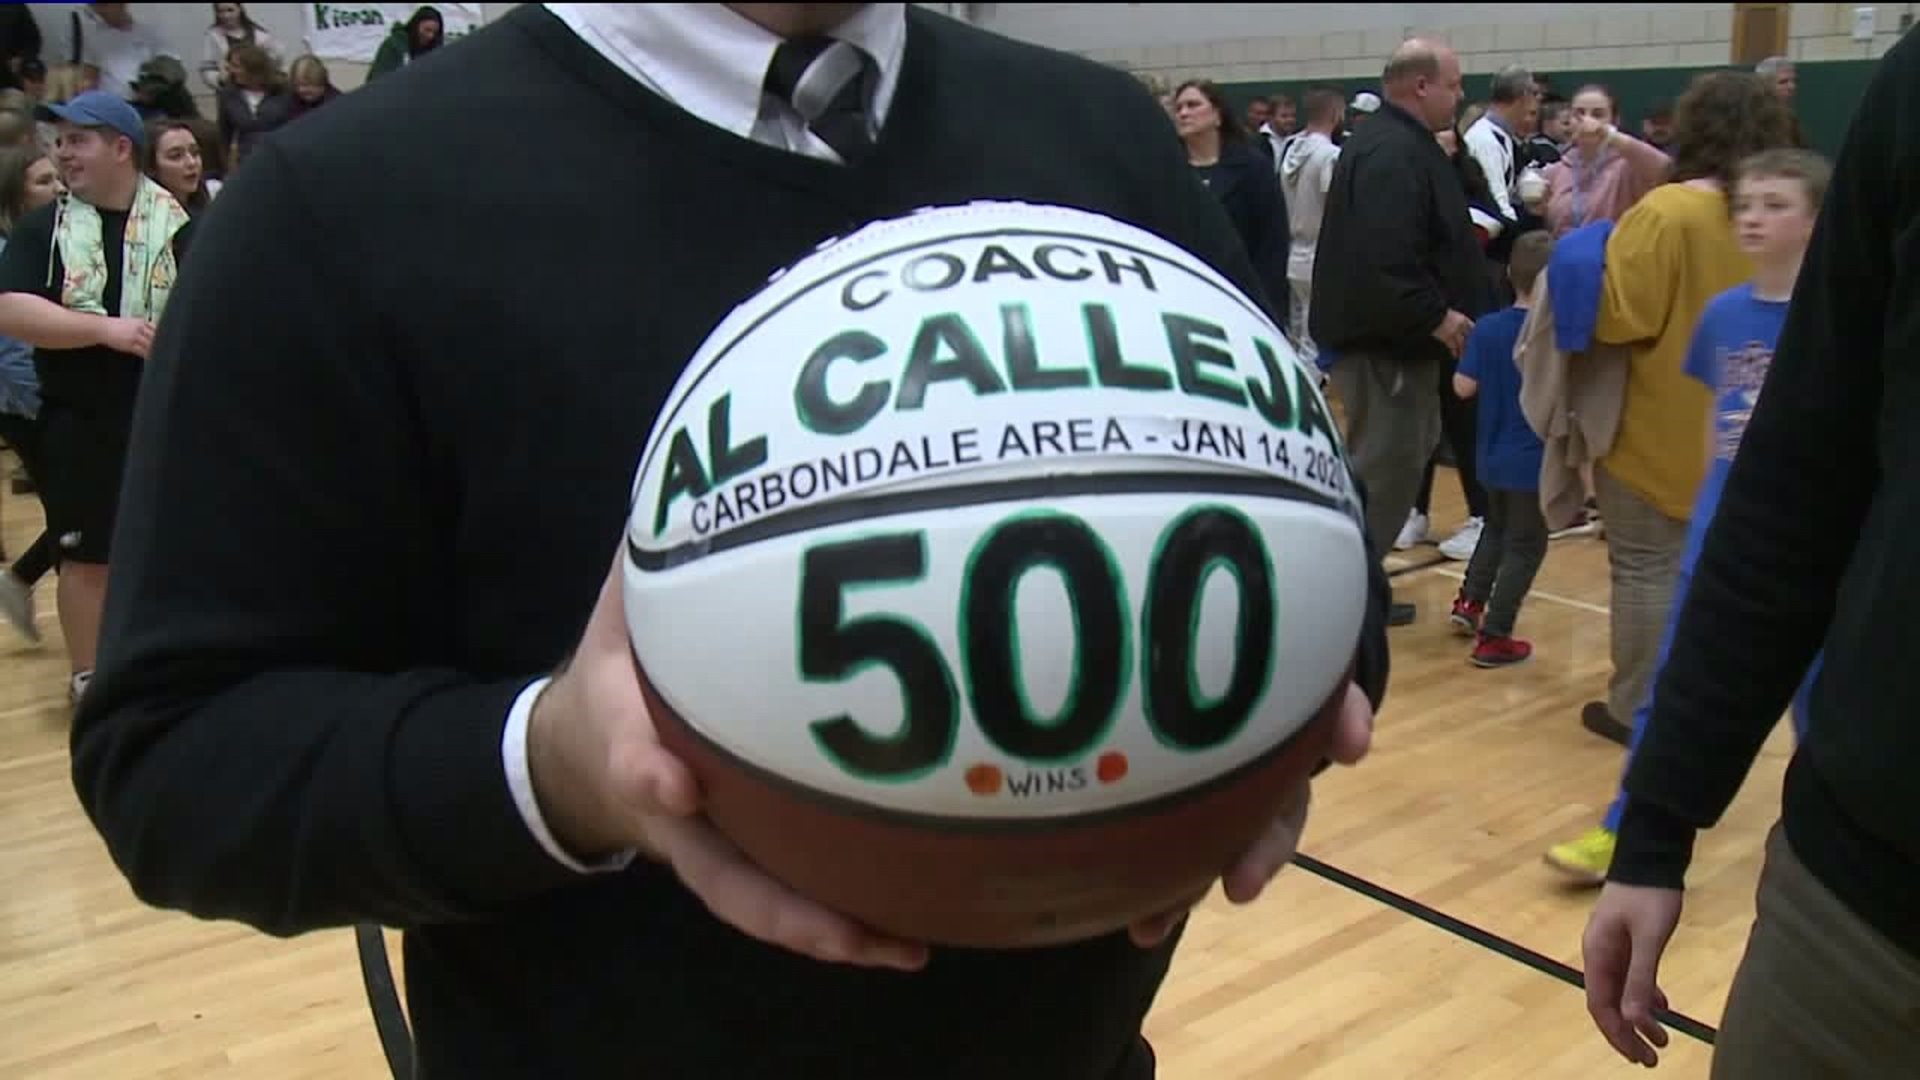 Al Callejas Records 500th Career Win as Holy Cross Beats Carbondale 67-32